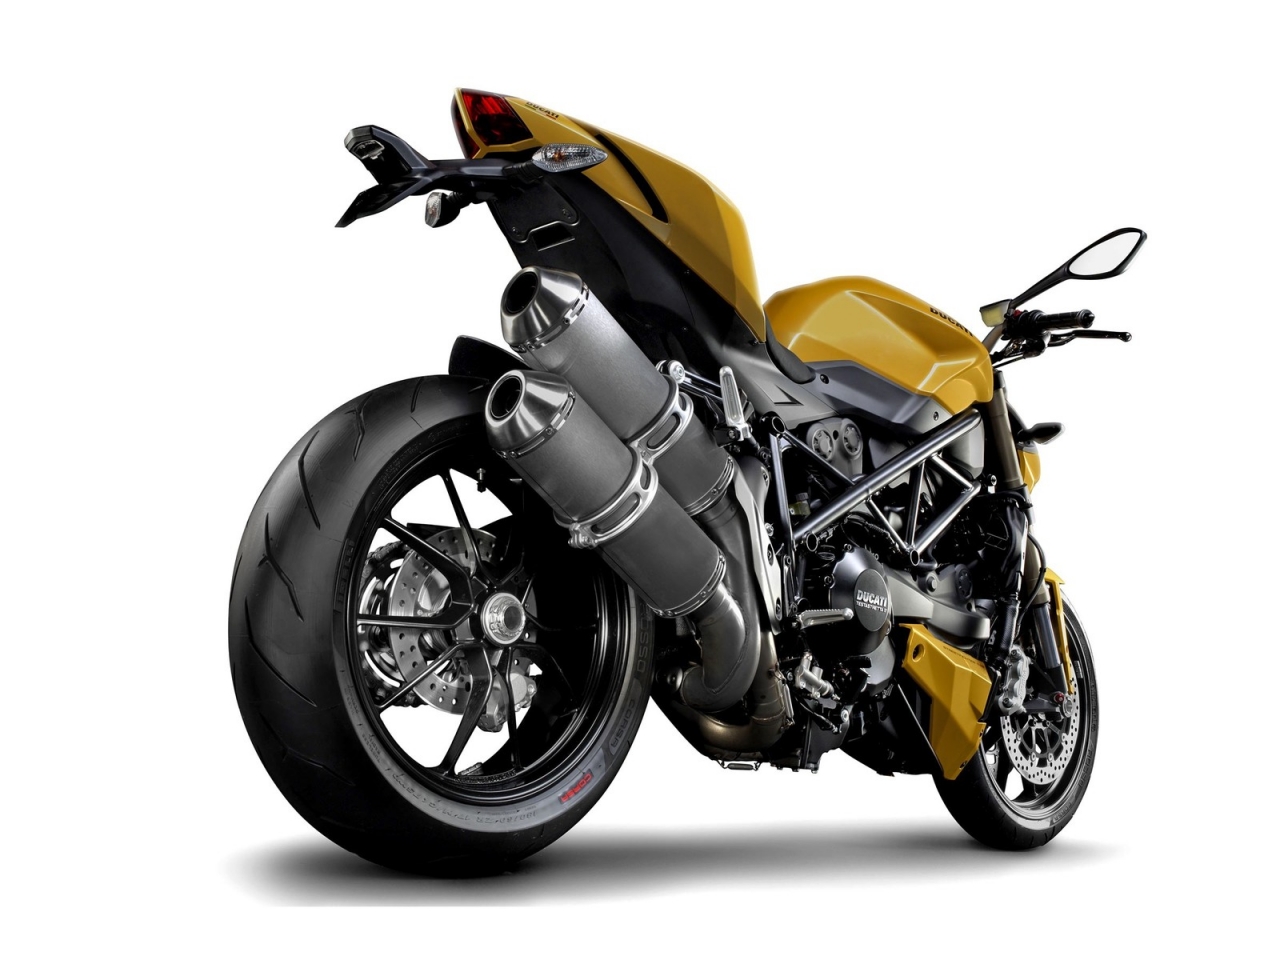  Ducati Streetfighter Rear for 1280 x 960 resolution